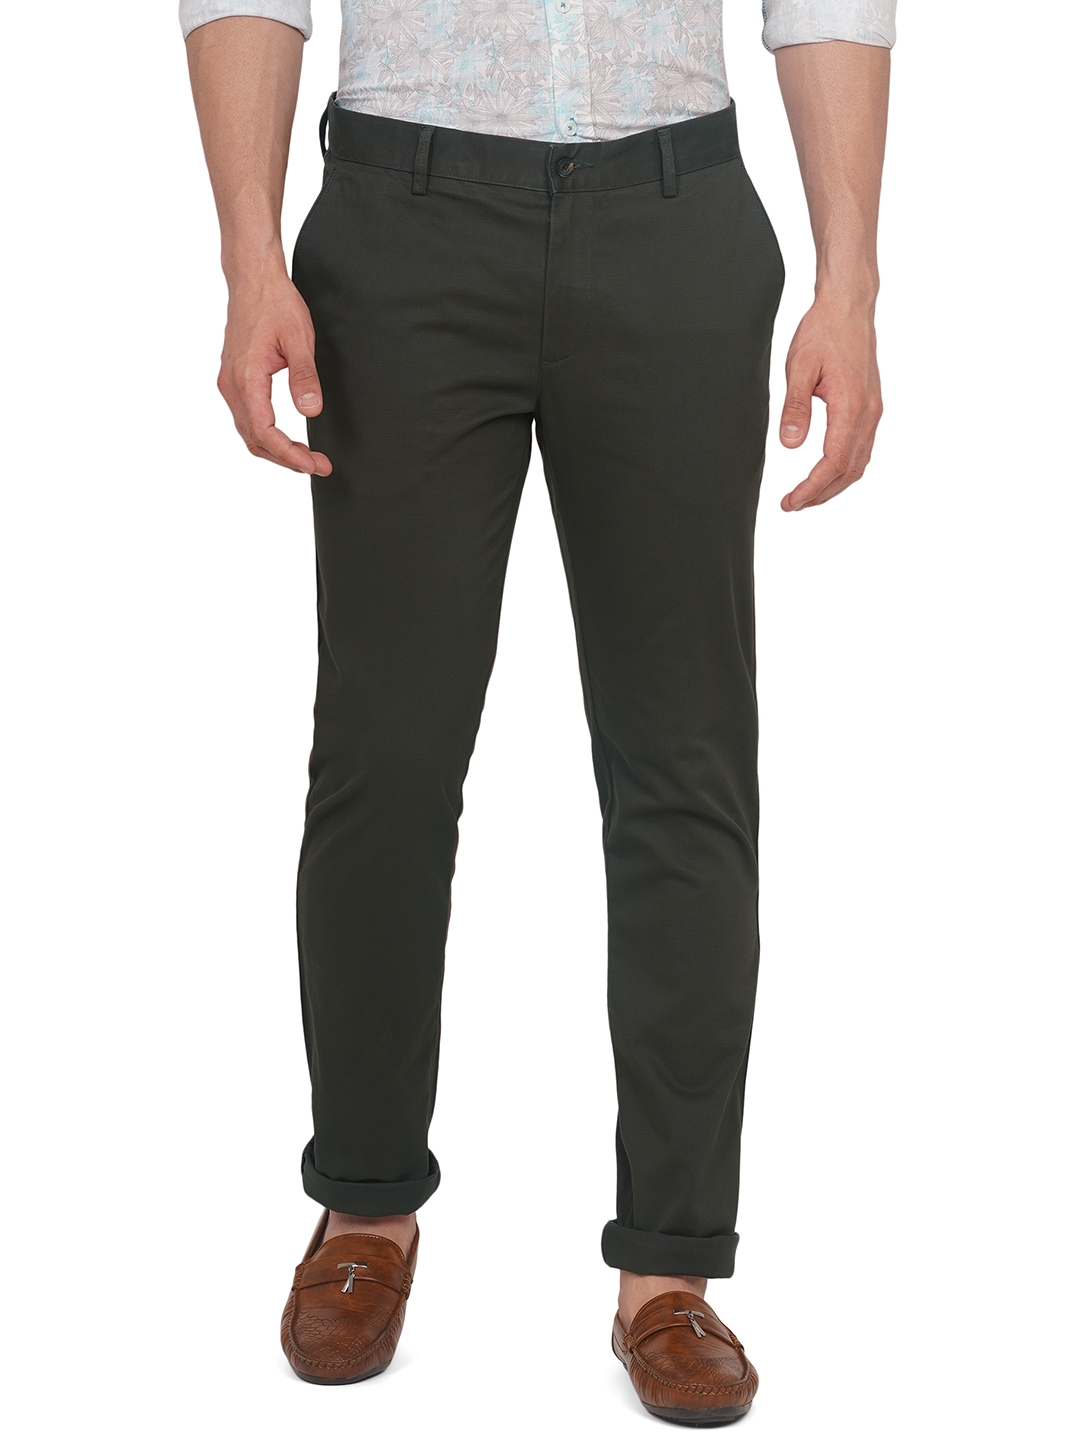 Greenfibre | Brown Solid Super Slim Fit Casual Trouser | Greenfibre